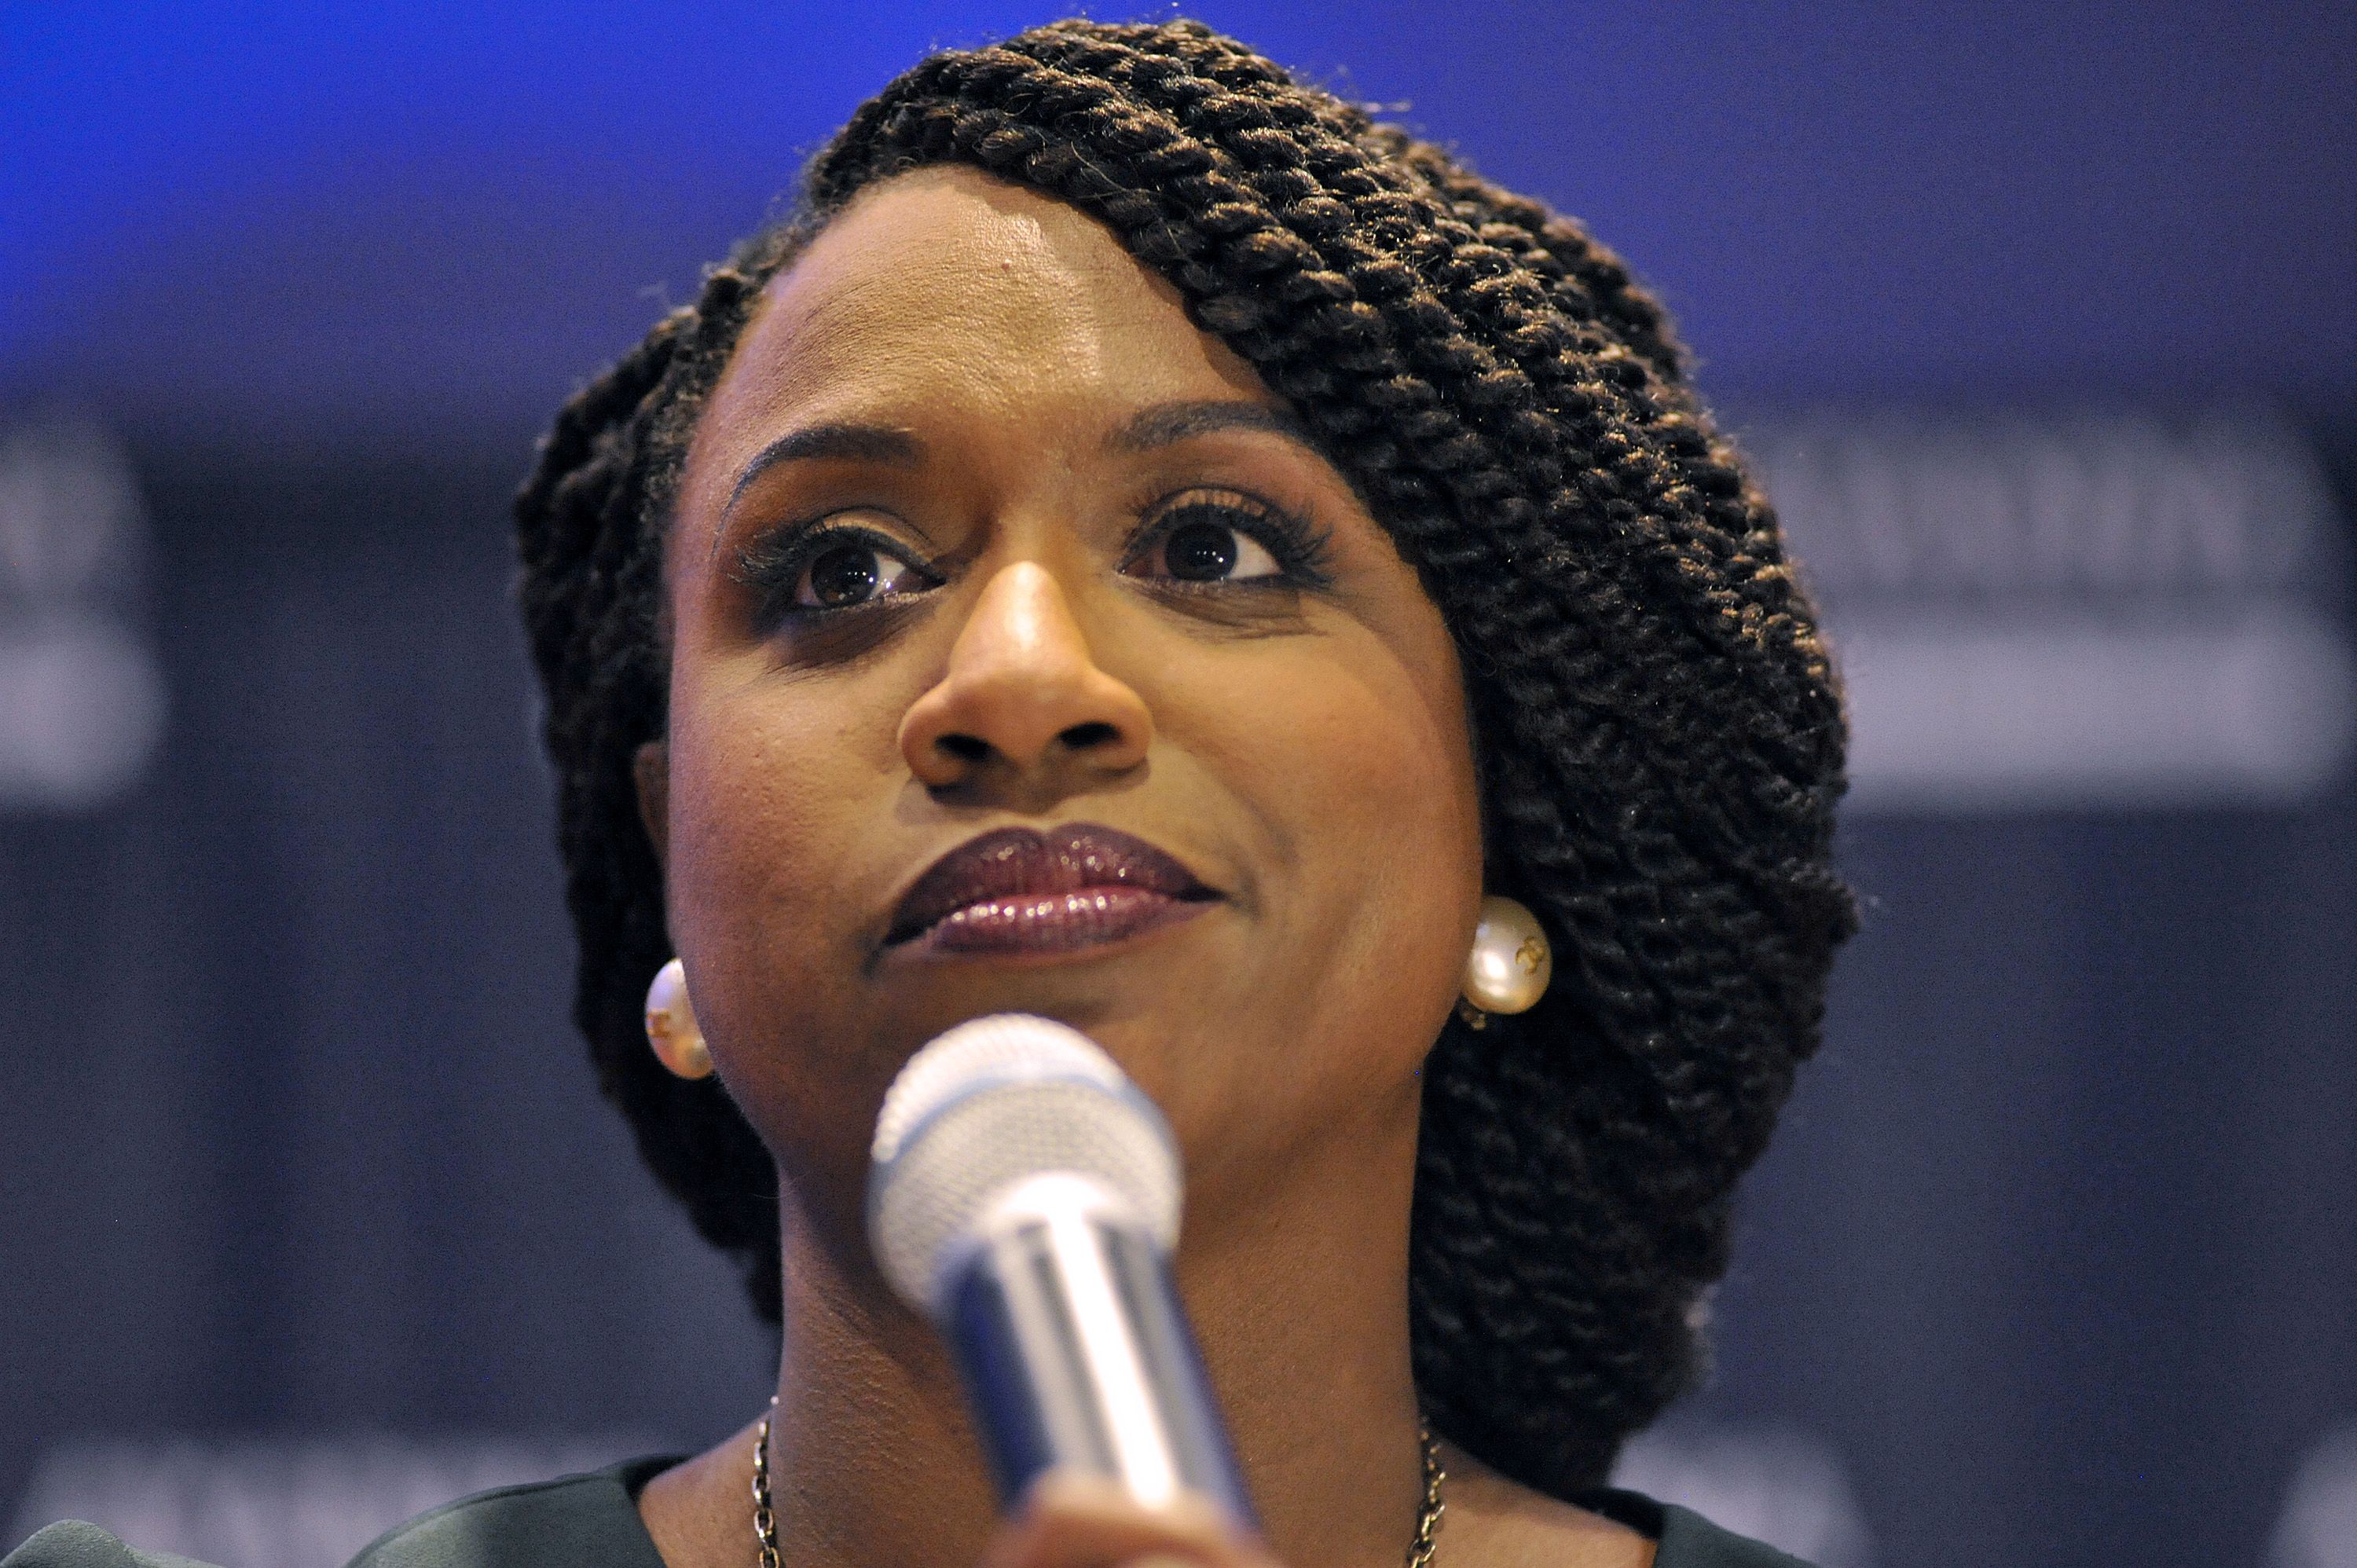 Ayanna Pressley, Boston City Council member and Democratic candidate for congress, delivers her victory speech on September 4, 2018. (Joseph Prezioso —AFP/Getty Images)